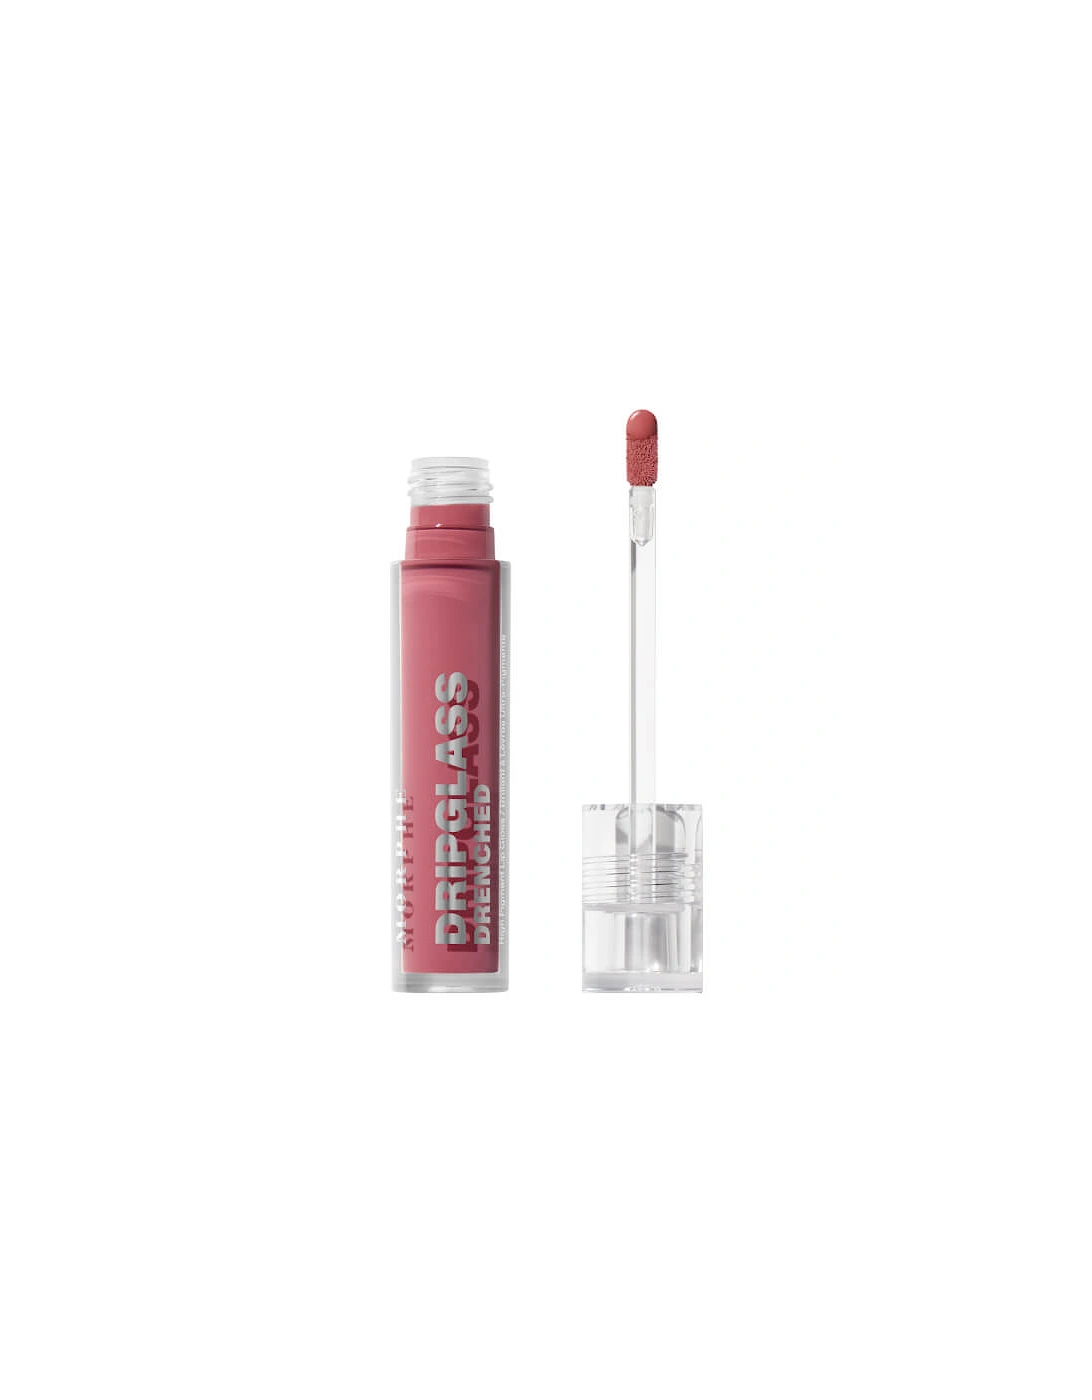 Dripglass Drenched High Pigment Lip Gloss - Mauve Splash, 2 of 1